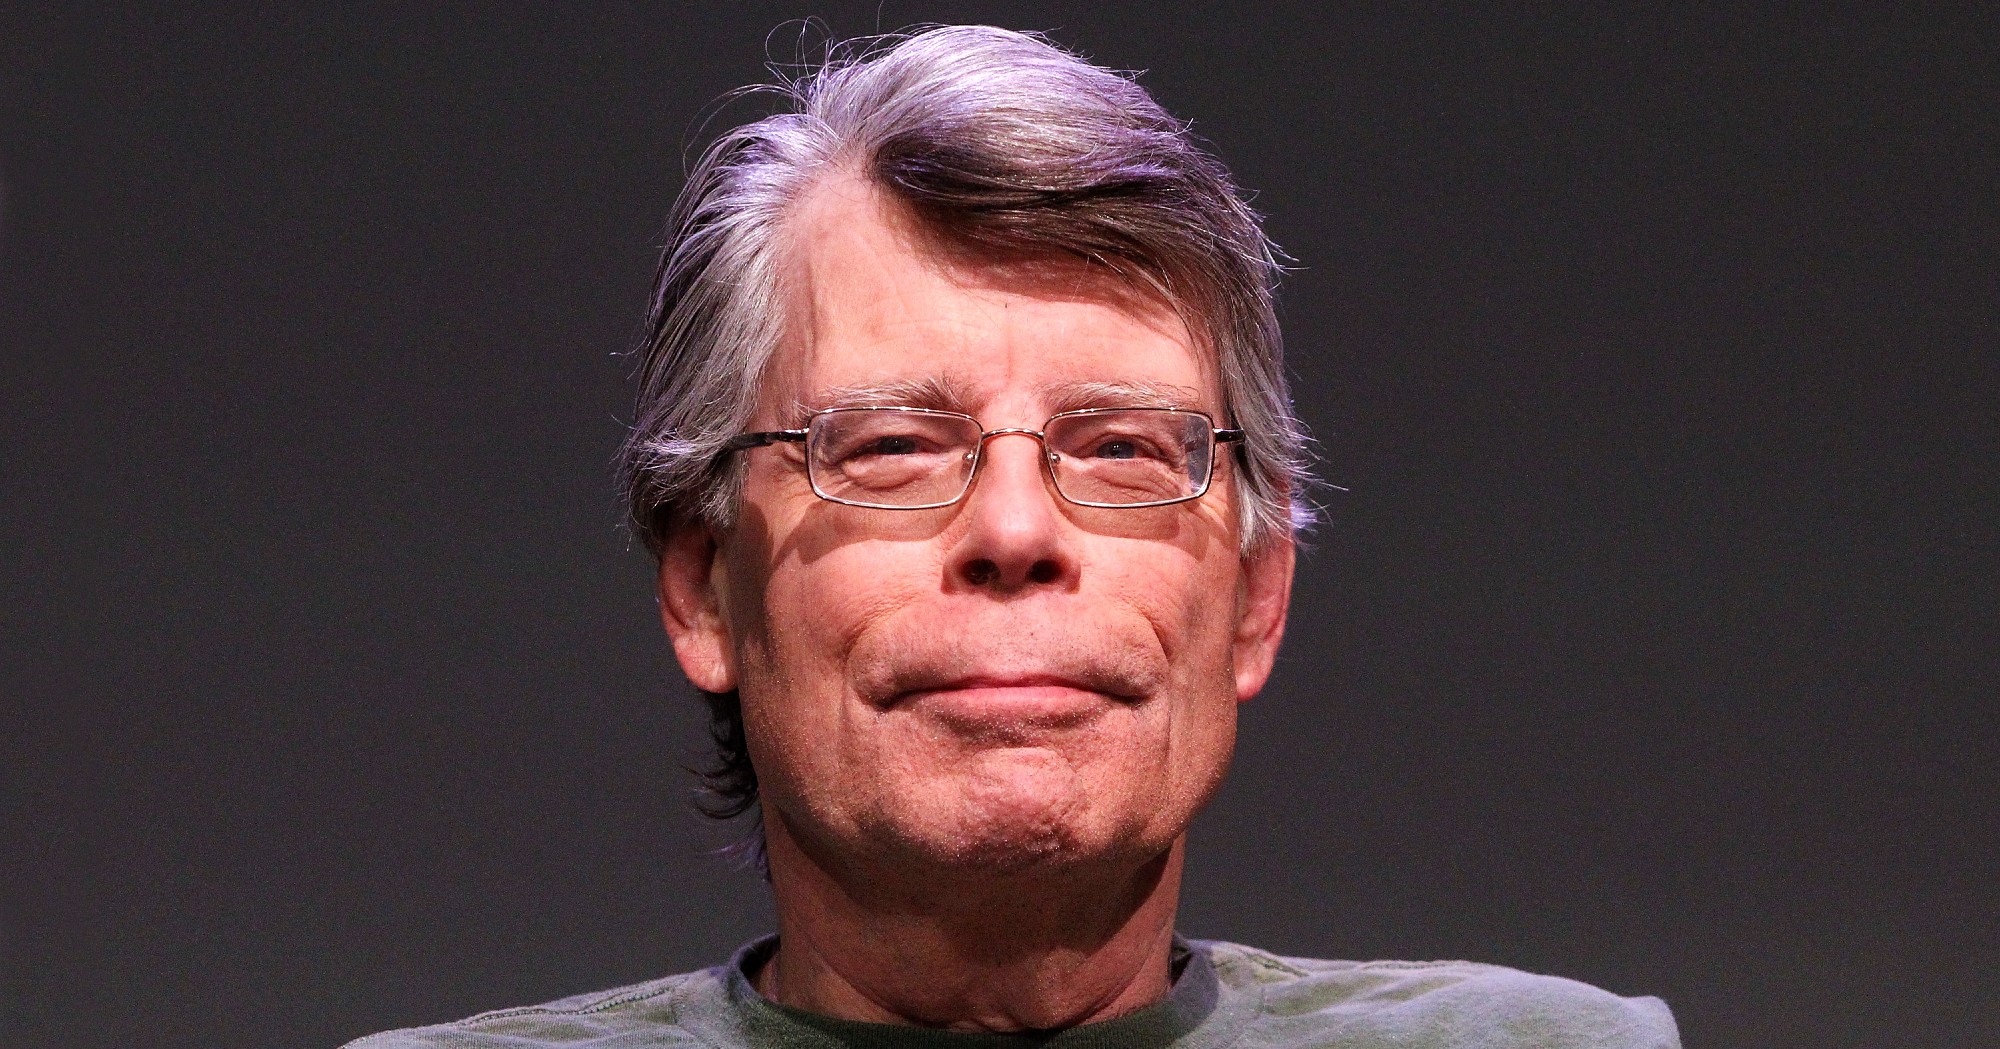 Salem's Lot Movie Update Is Exciting News for Stephen King Fans